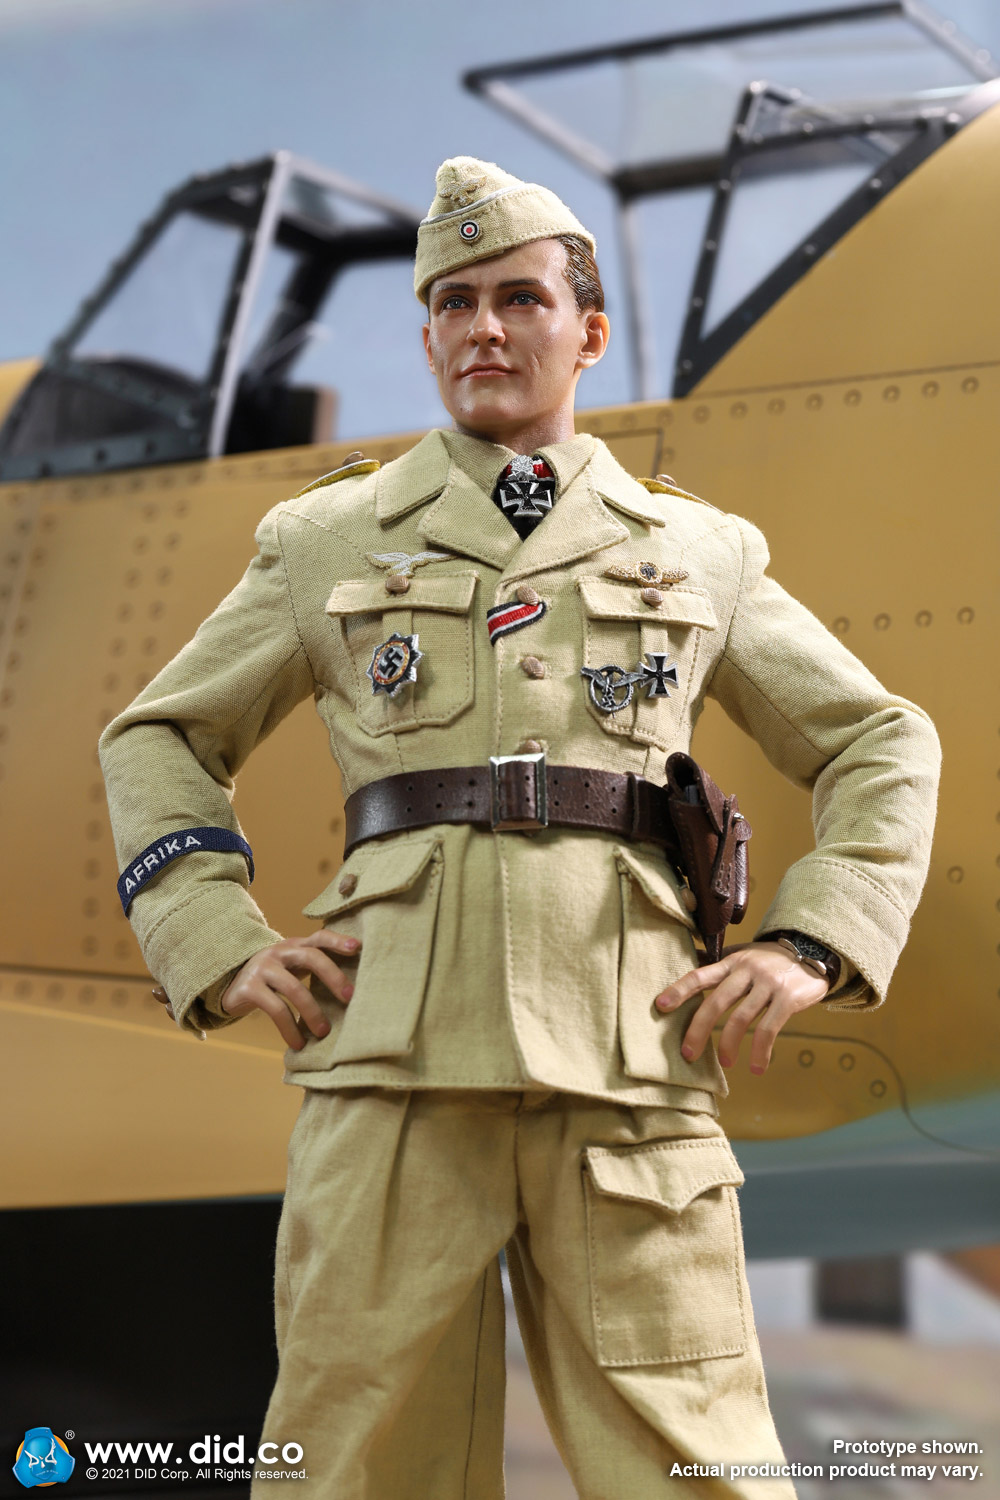 diorama - NEW PRODUCT: D80154 WWII German Luftwaffe Flying Ace “Star Of Africa” – Hans-Joachim Marseille & E60060  Diorama Of “Star Of Africa” 10404